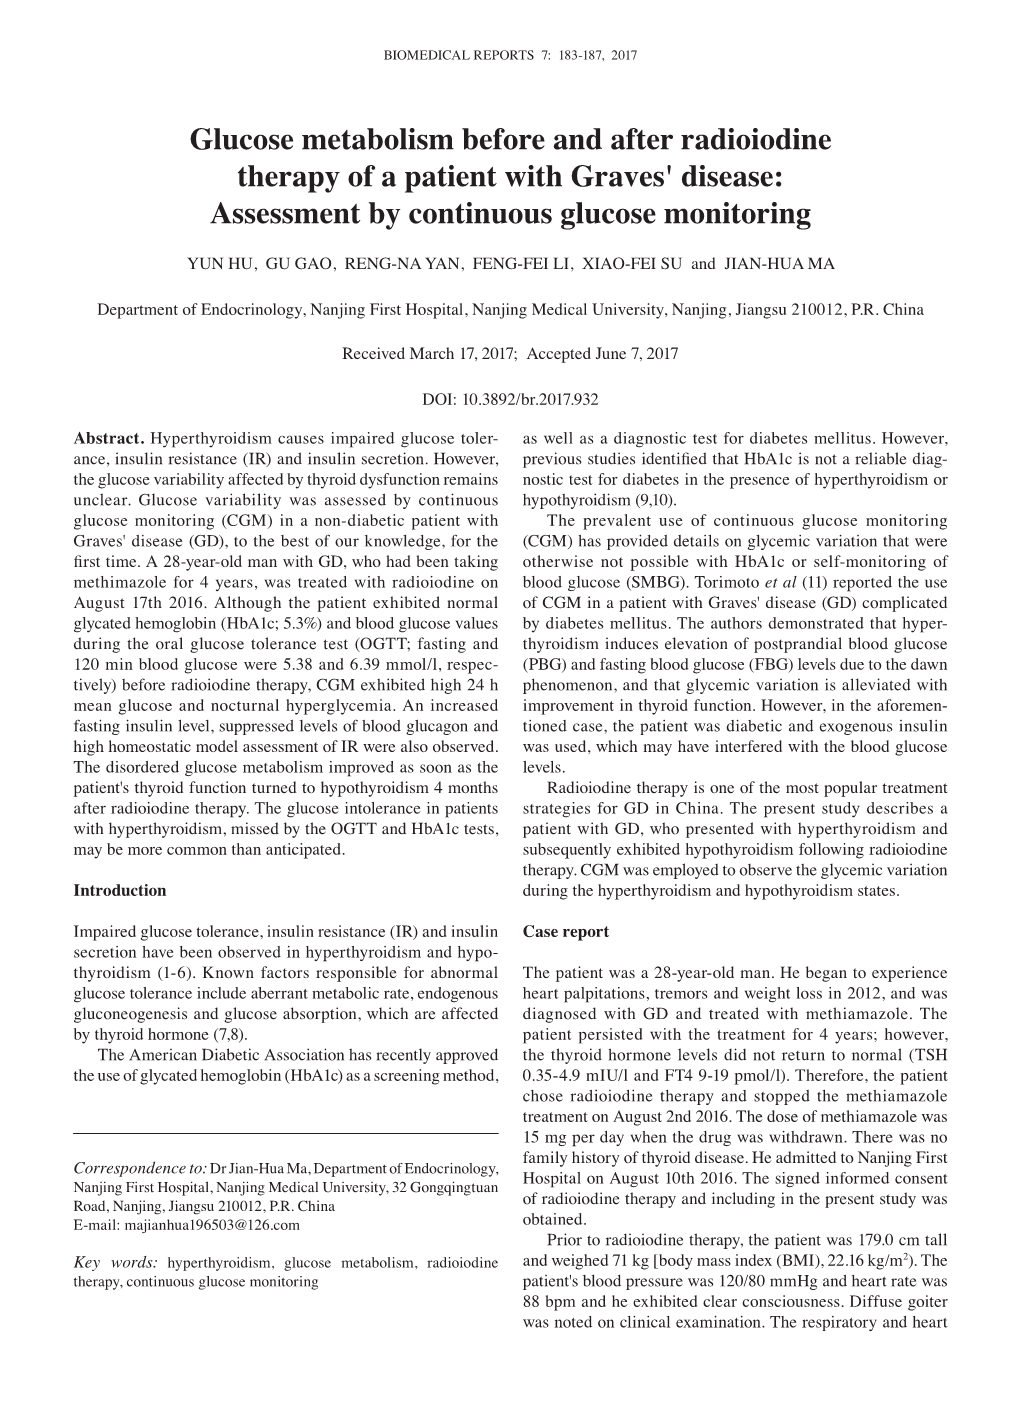 Glucose Metabolism Before and After Radioiodine Therapy of a Patient with Graves' Disease: Assessment by Continuous Glucose Monitoring